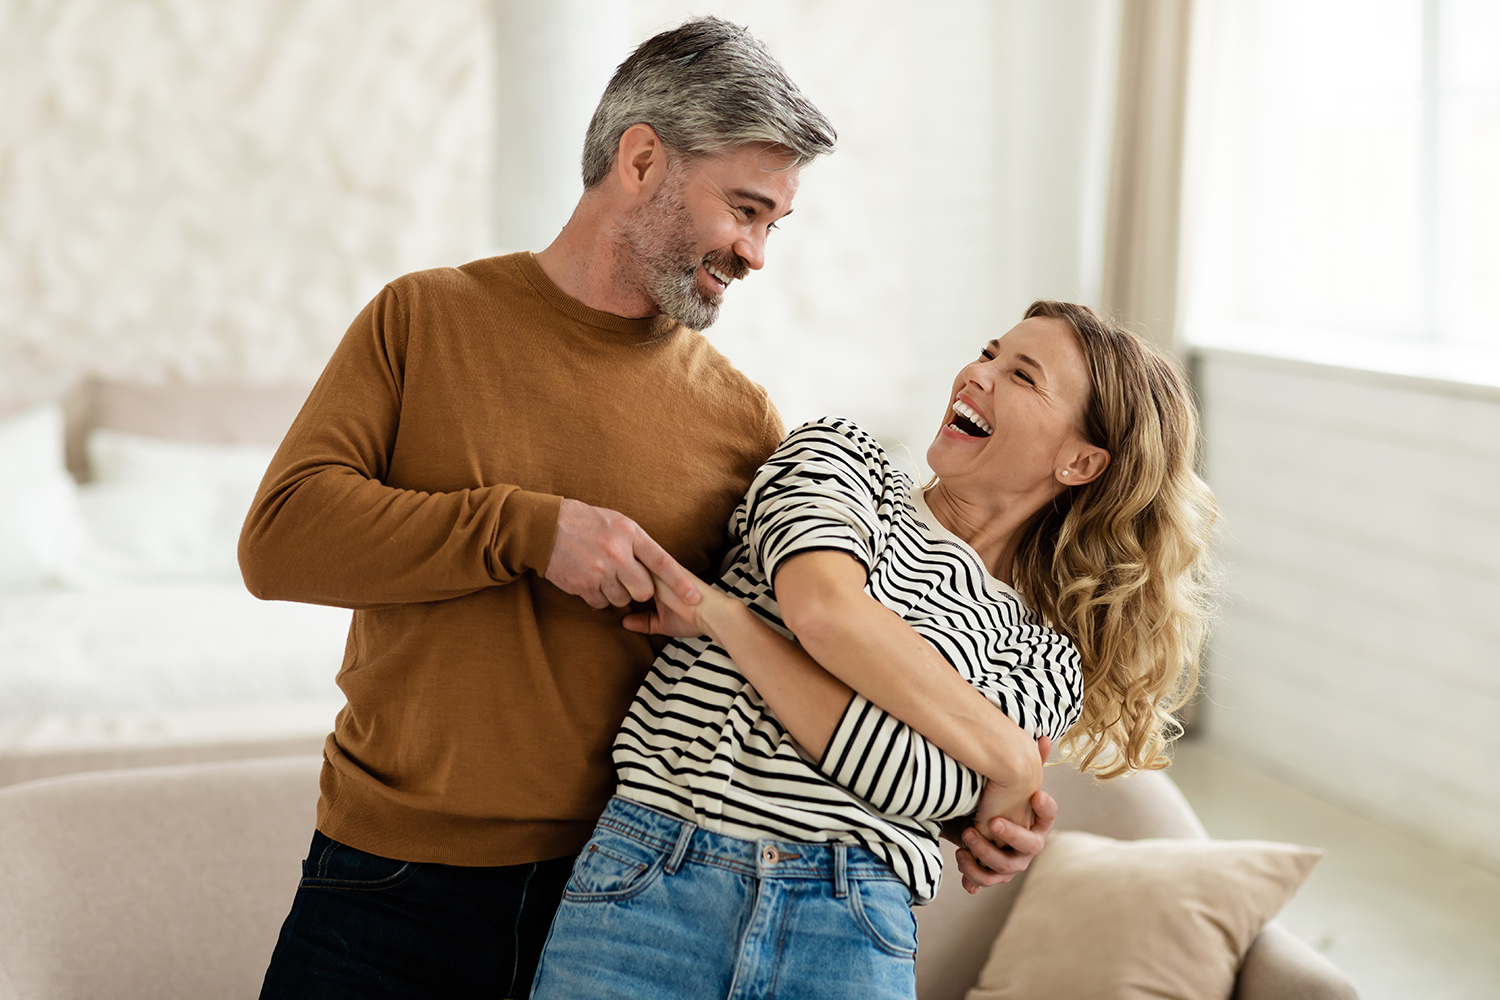 Joyful Couple Dancing Having Fun At Home. Loving Husband And Wife Having Date Hugging And Laughing Indoors. Romantic Relationship And Happy Marriage Concept